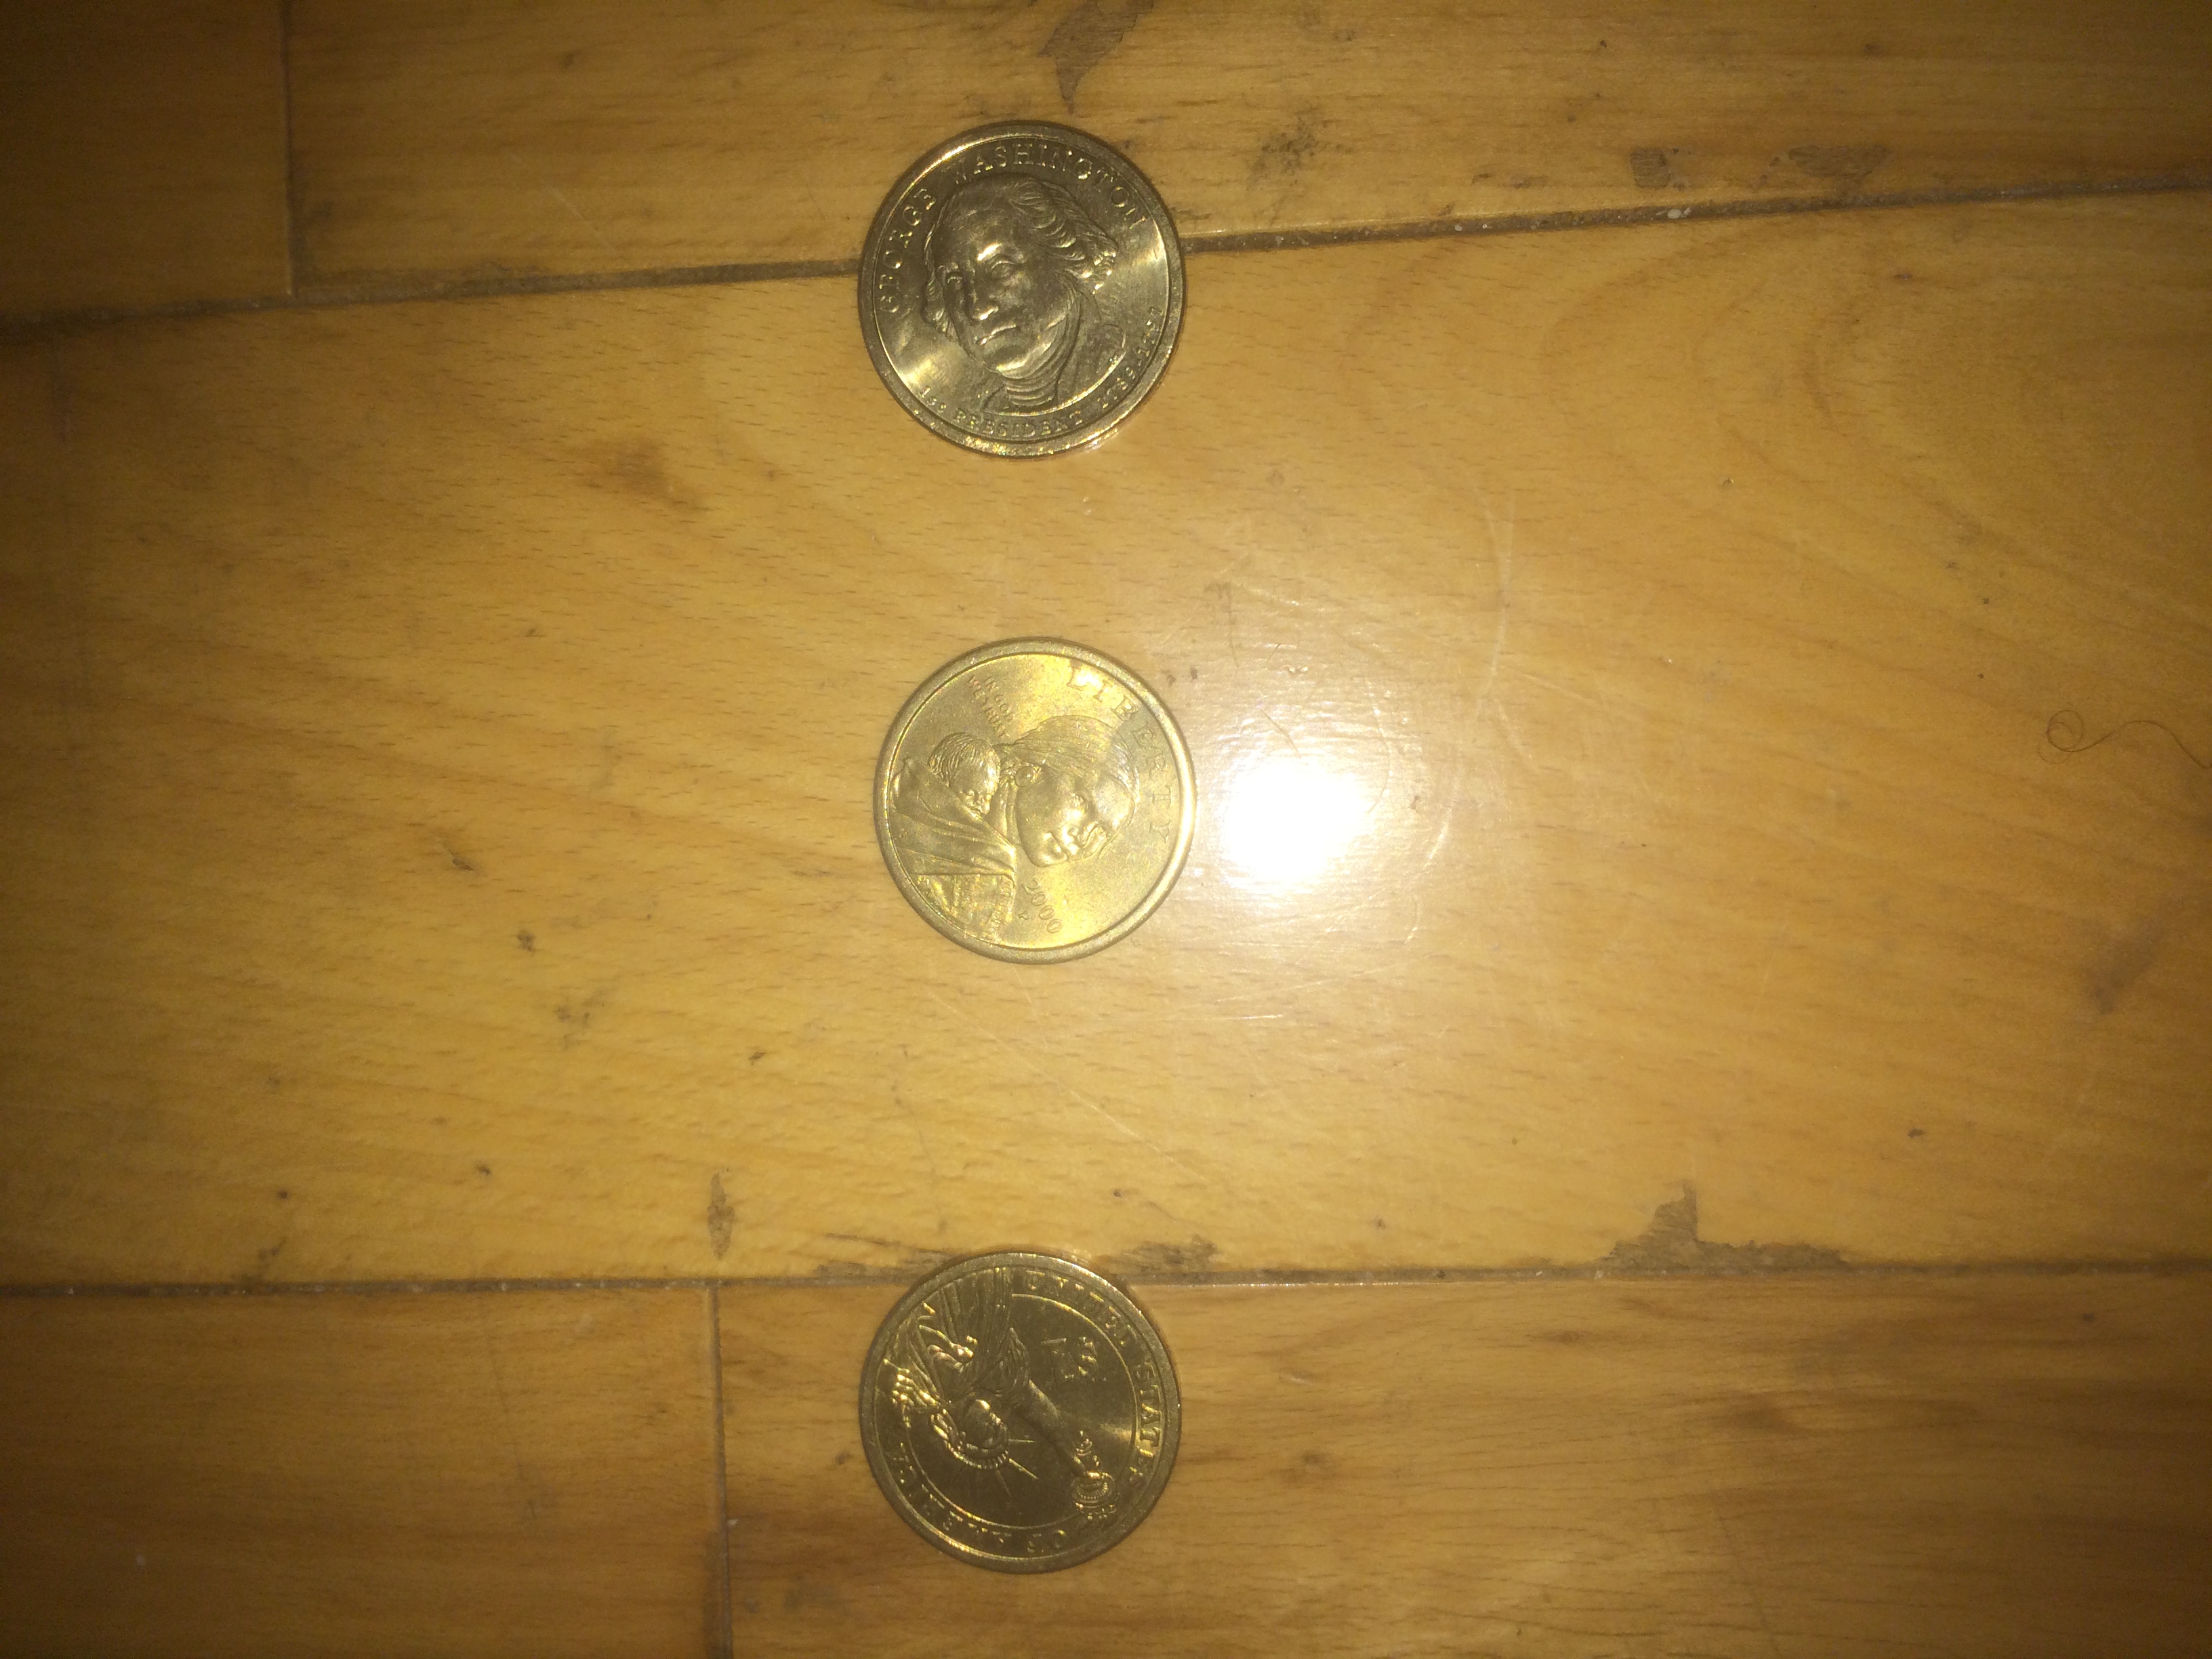 The three gold coins I actually won.